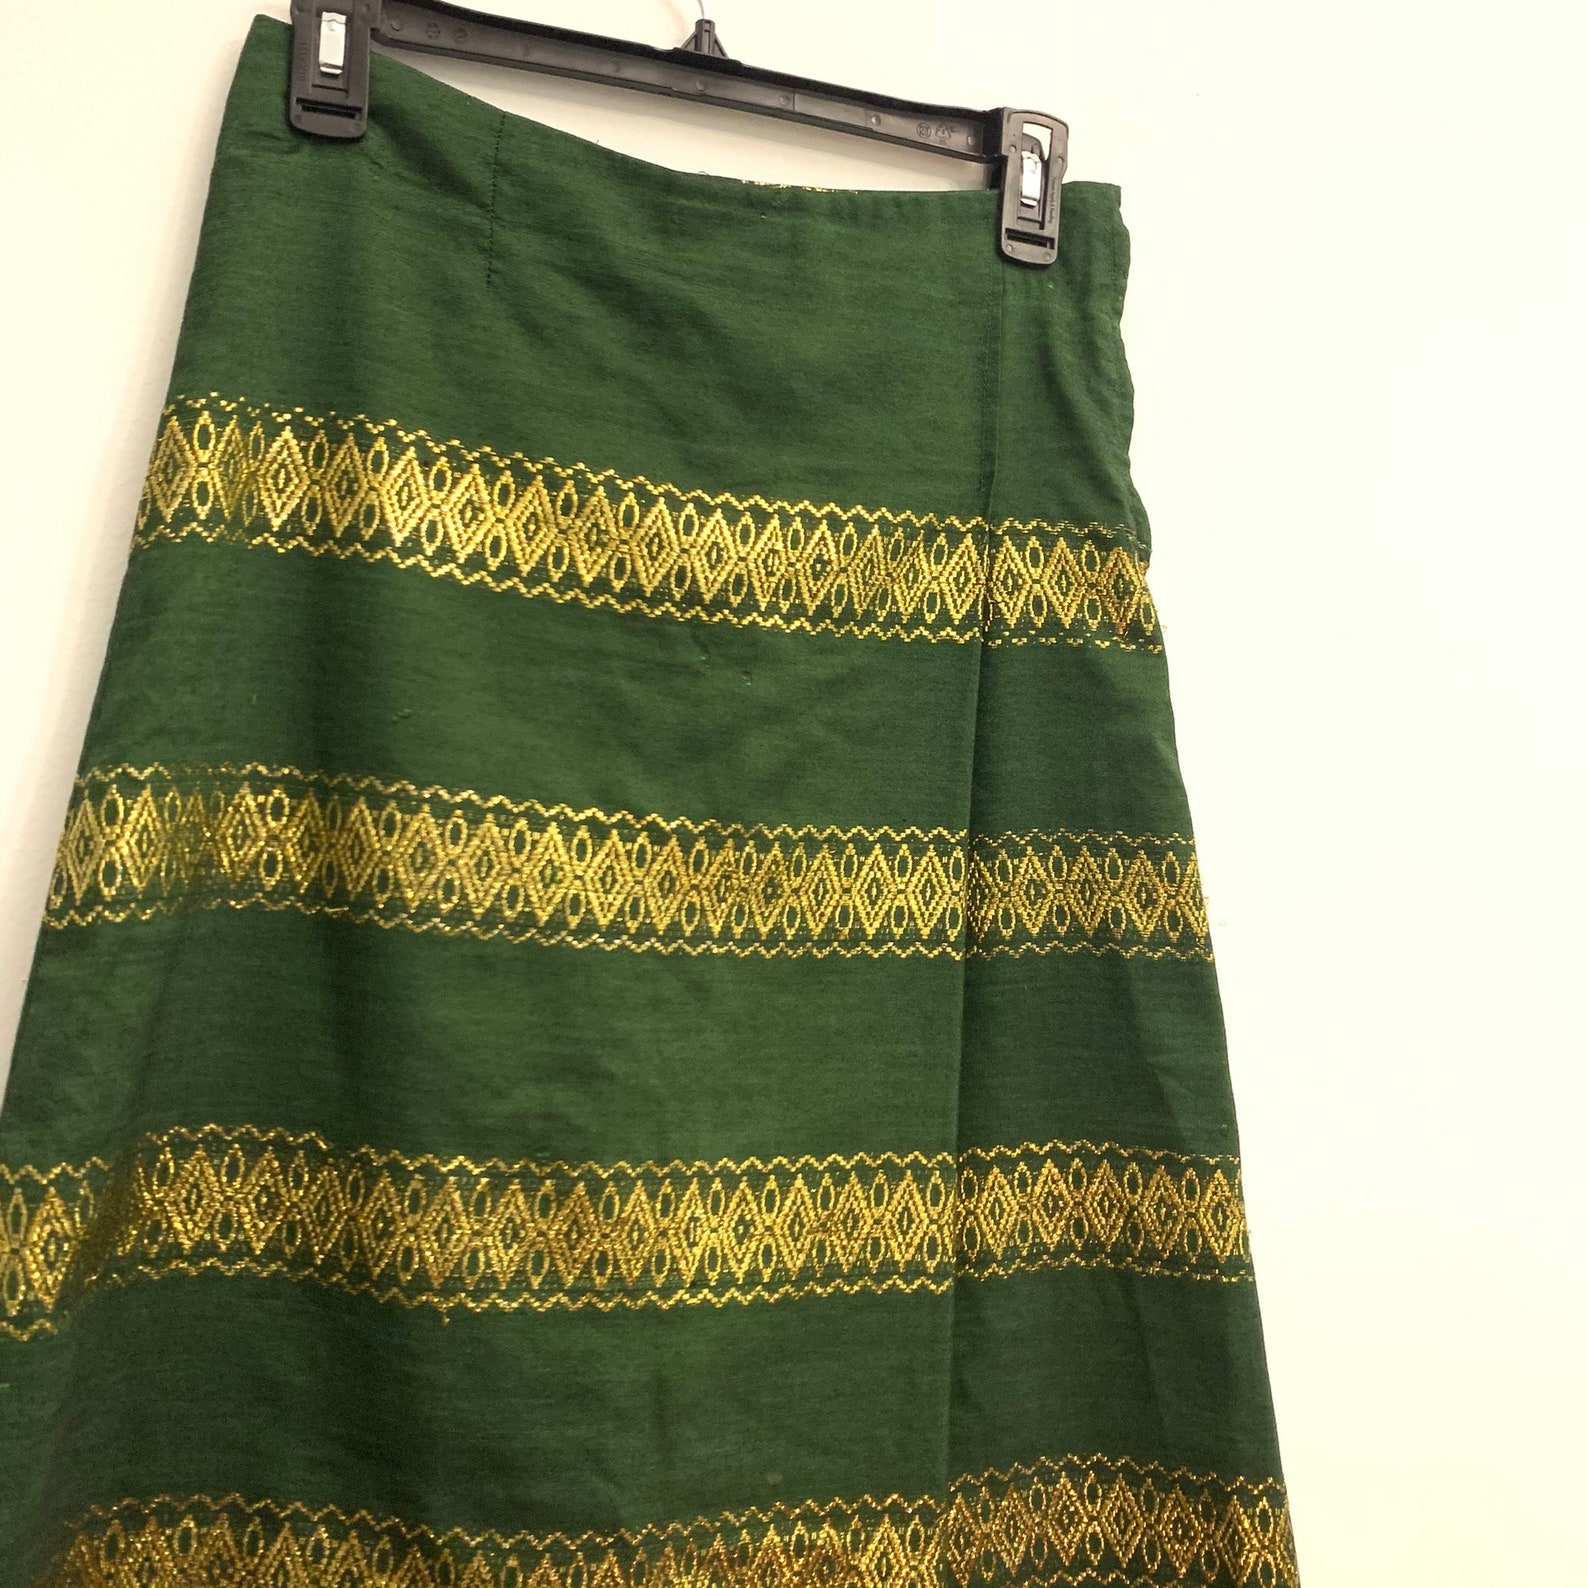 Vintage Green Skirt with Beautiful Gold Details | Etsy